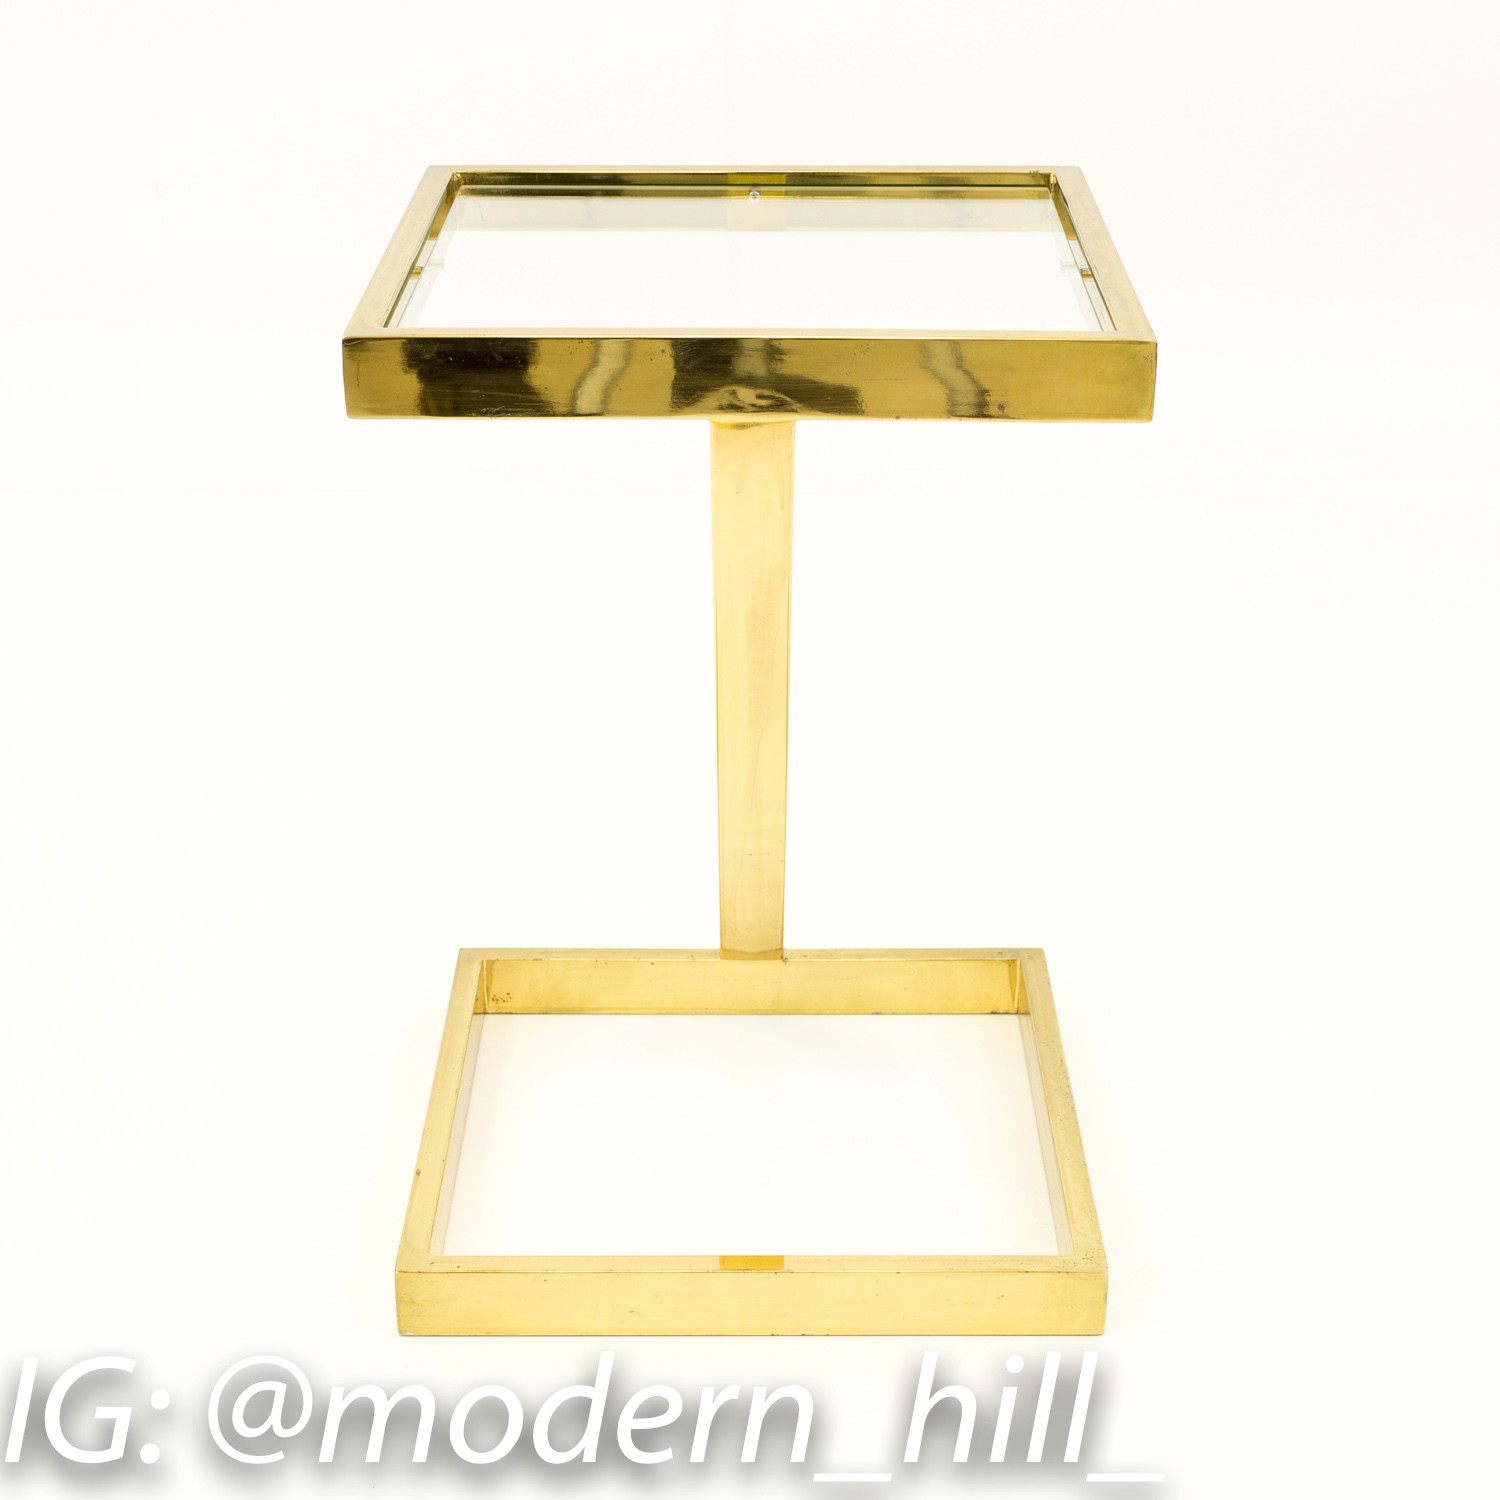 Milo Baughman Style Mid Century Modern Brass Z Side End Tables - Matching Pair